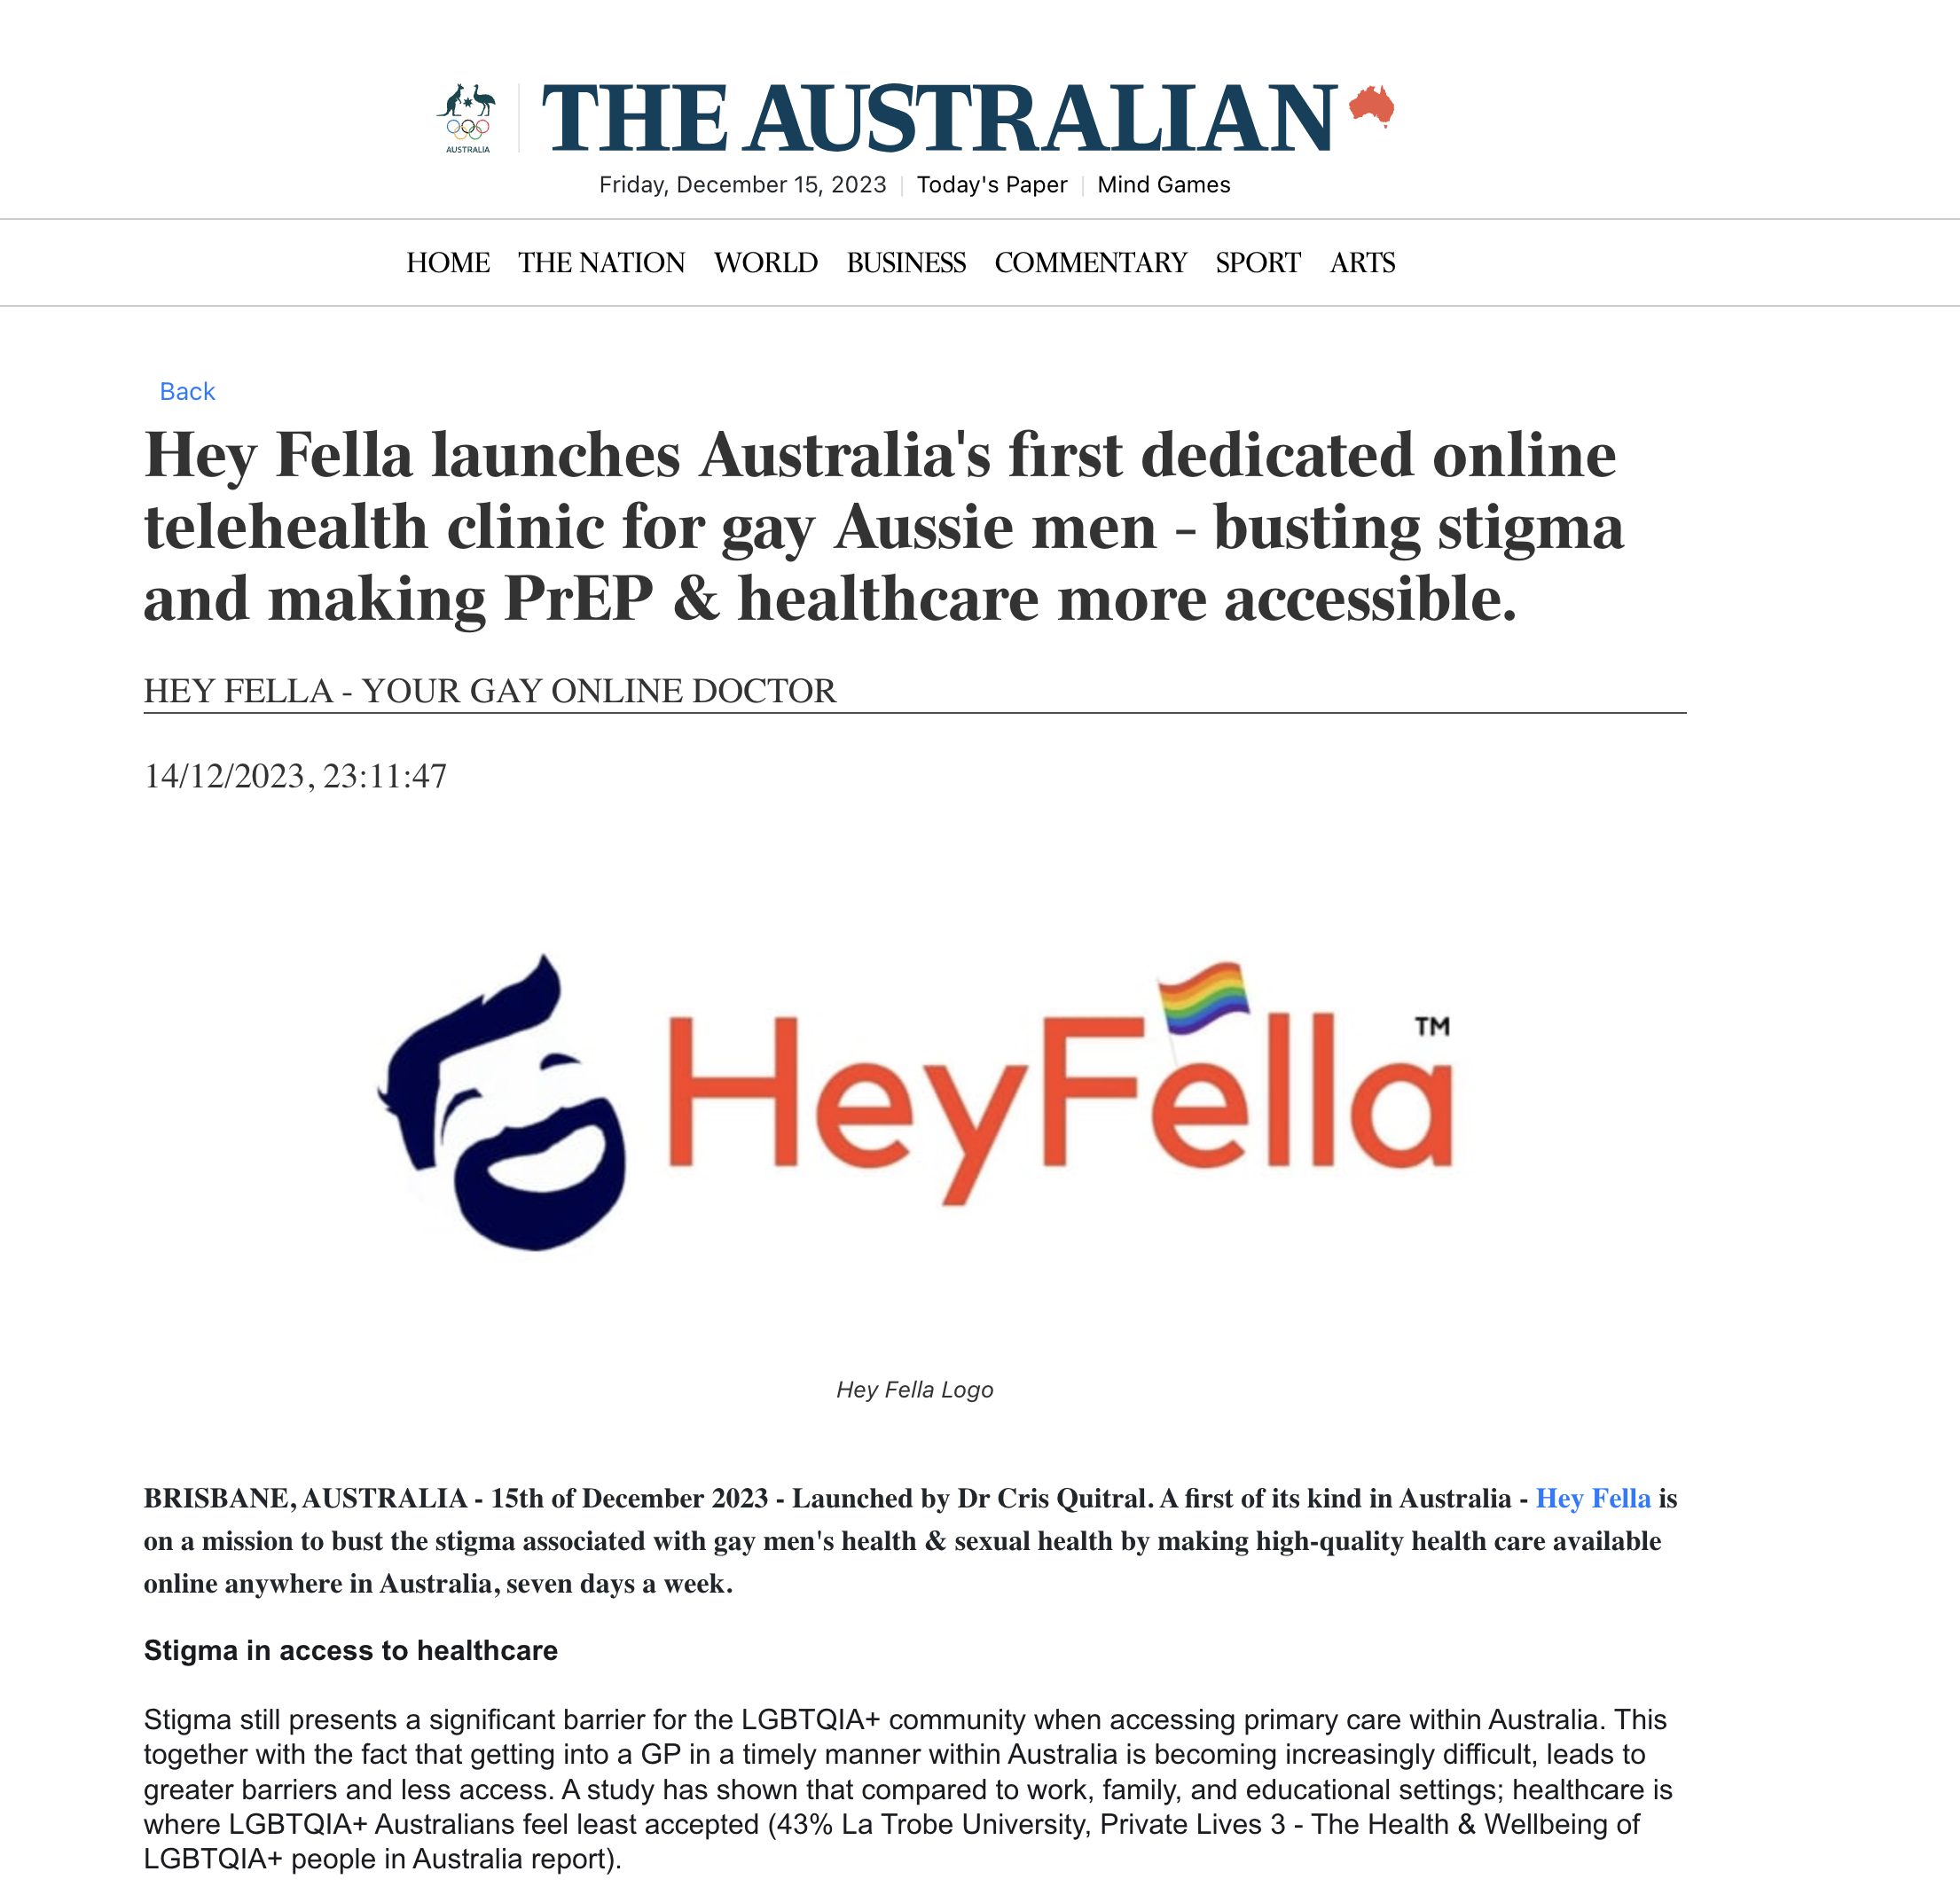 Hey Fella launches Australia's first dedicated online telehealth clinic for gay Aussie men - busting stigma and making PrEP & healthcare more accessible.